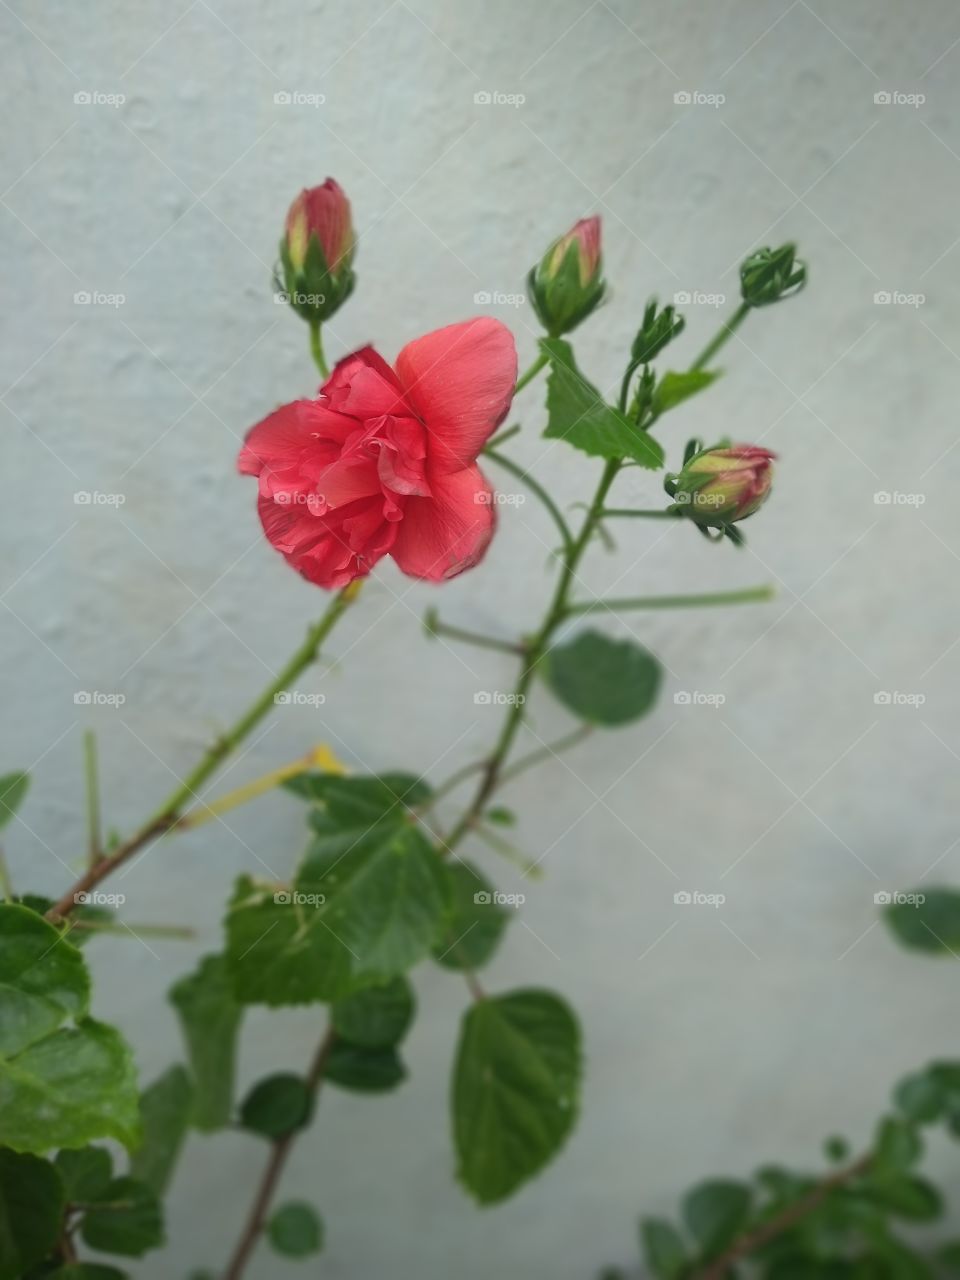 a red rose in home